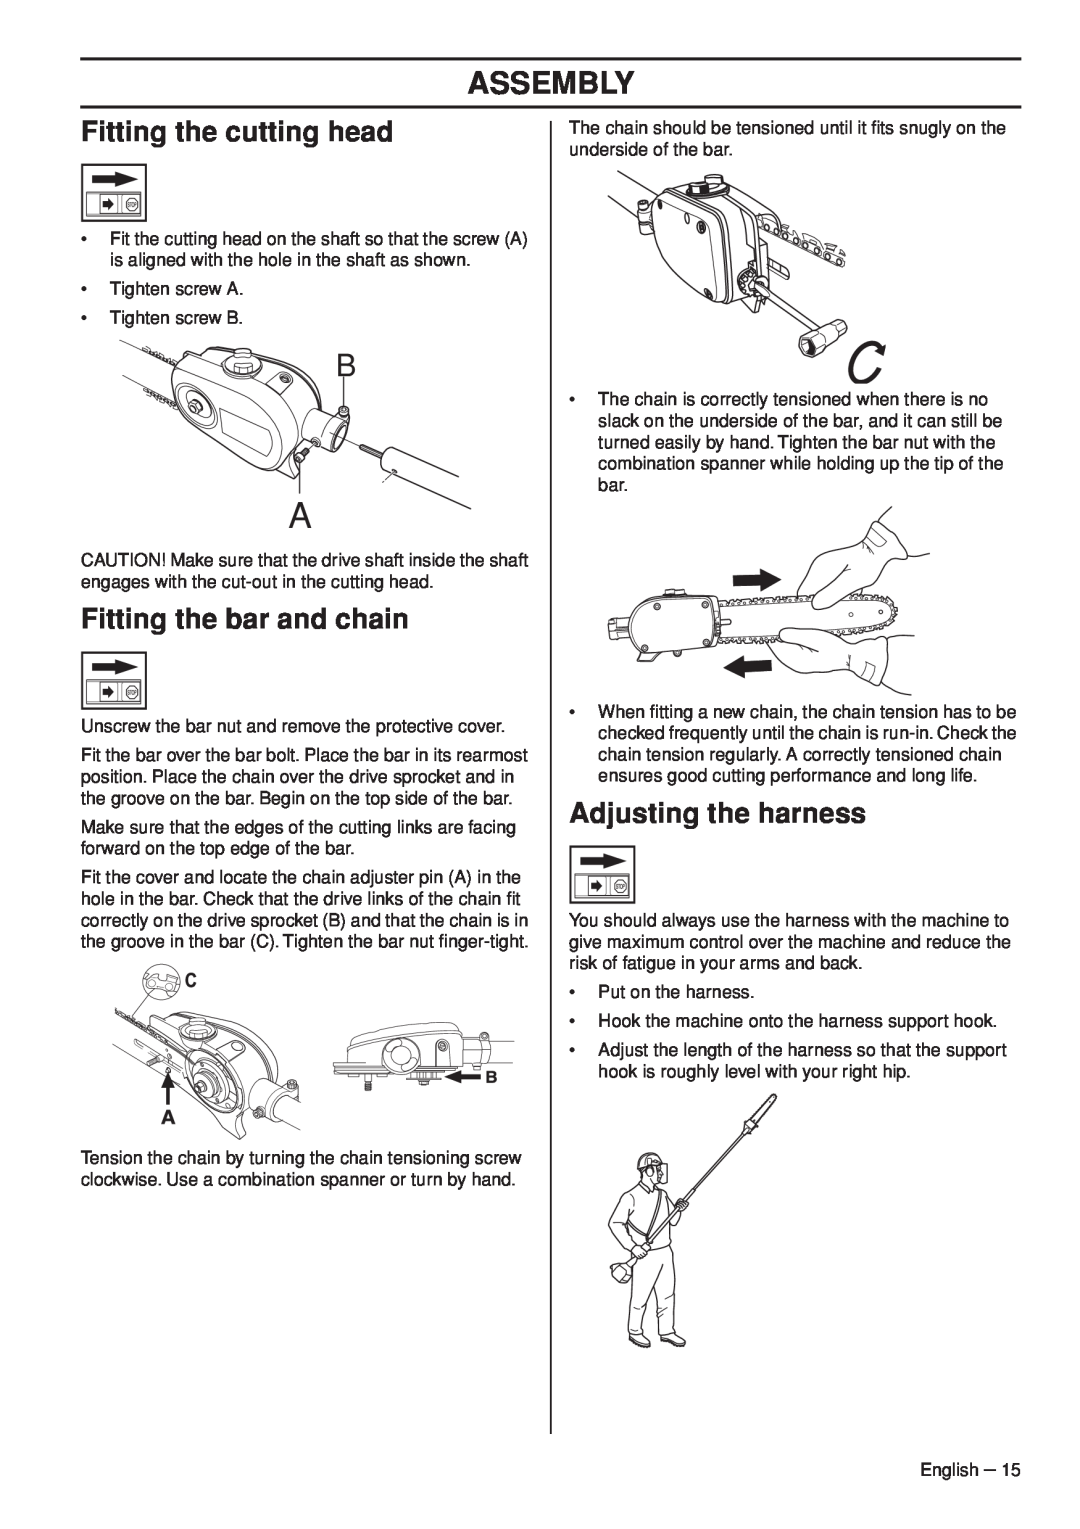 Husqvarna 966976701 manual Assembly, Fitting the cutting head, Fitting the bar and chain, Adjusting the harness 